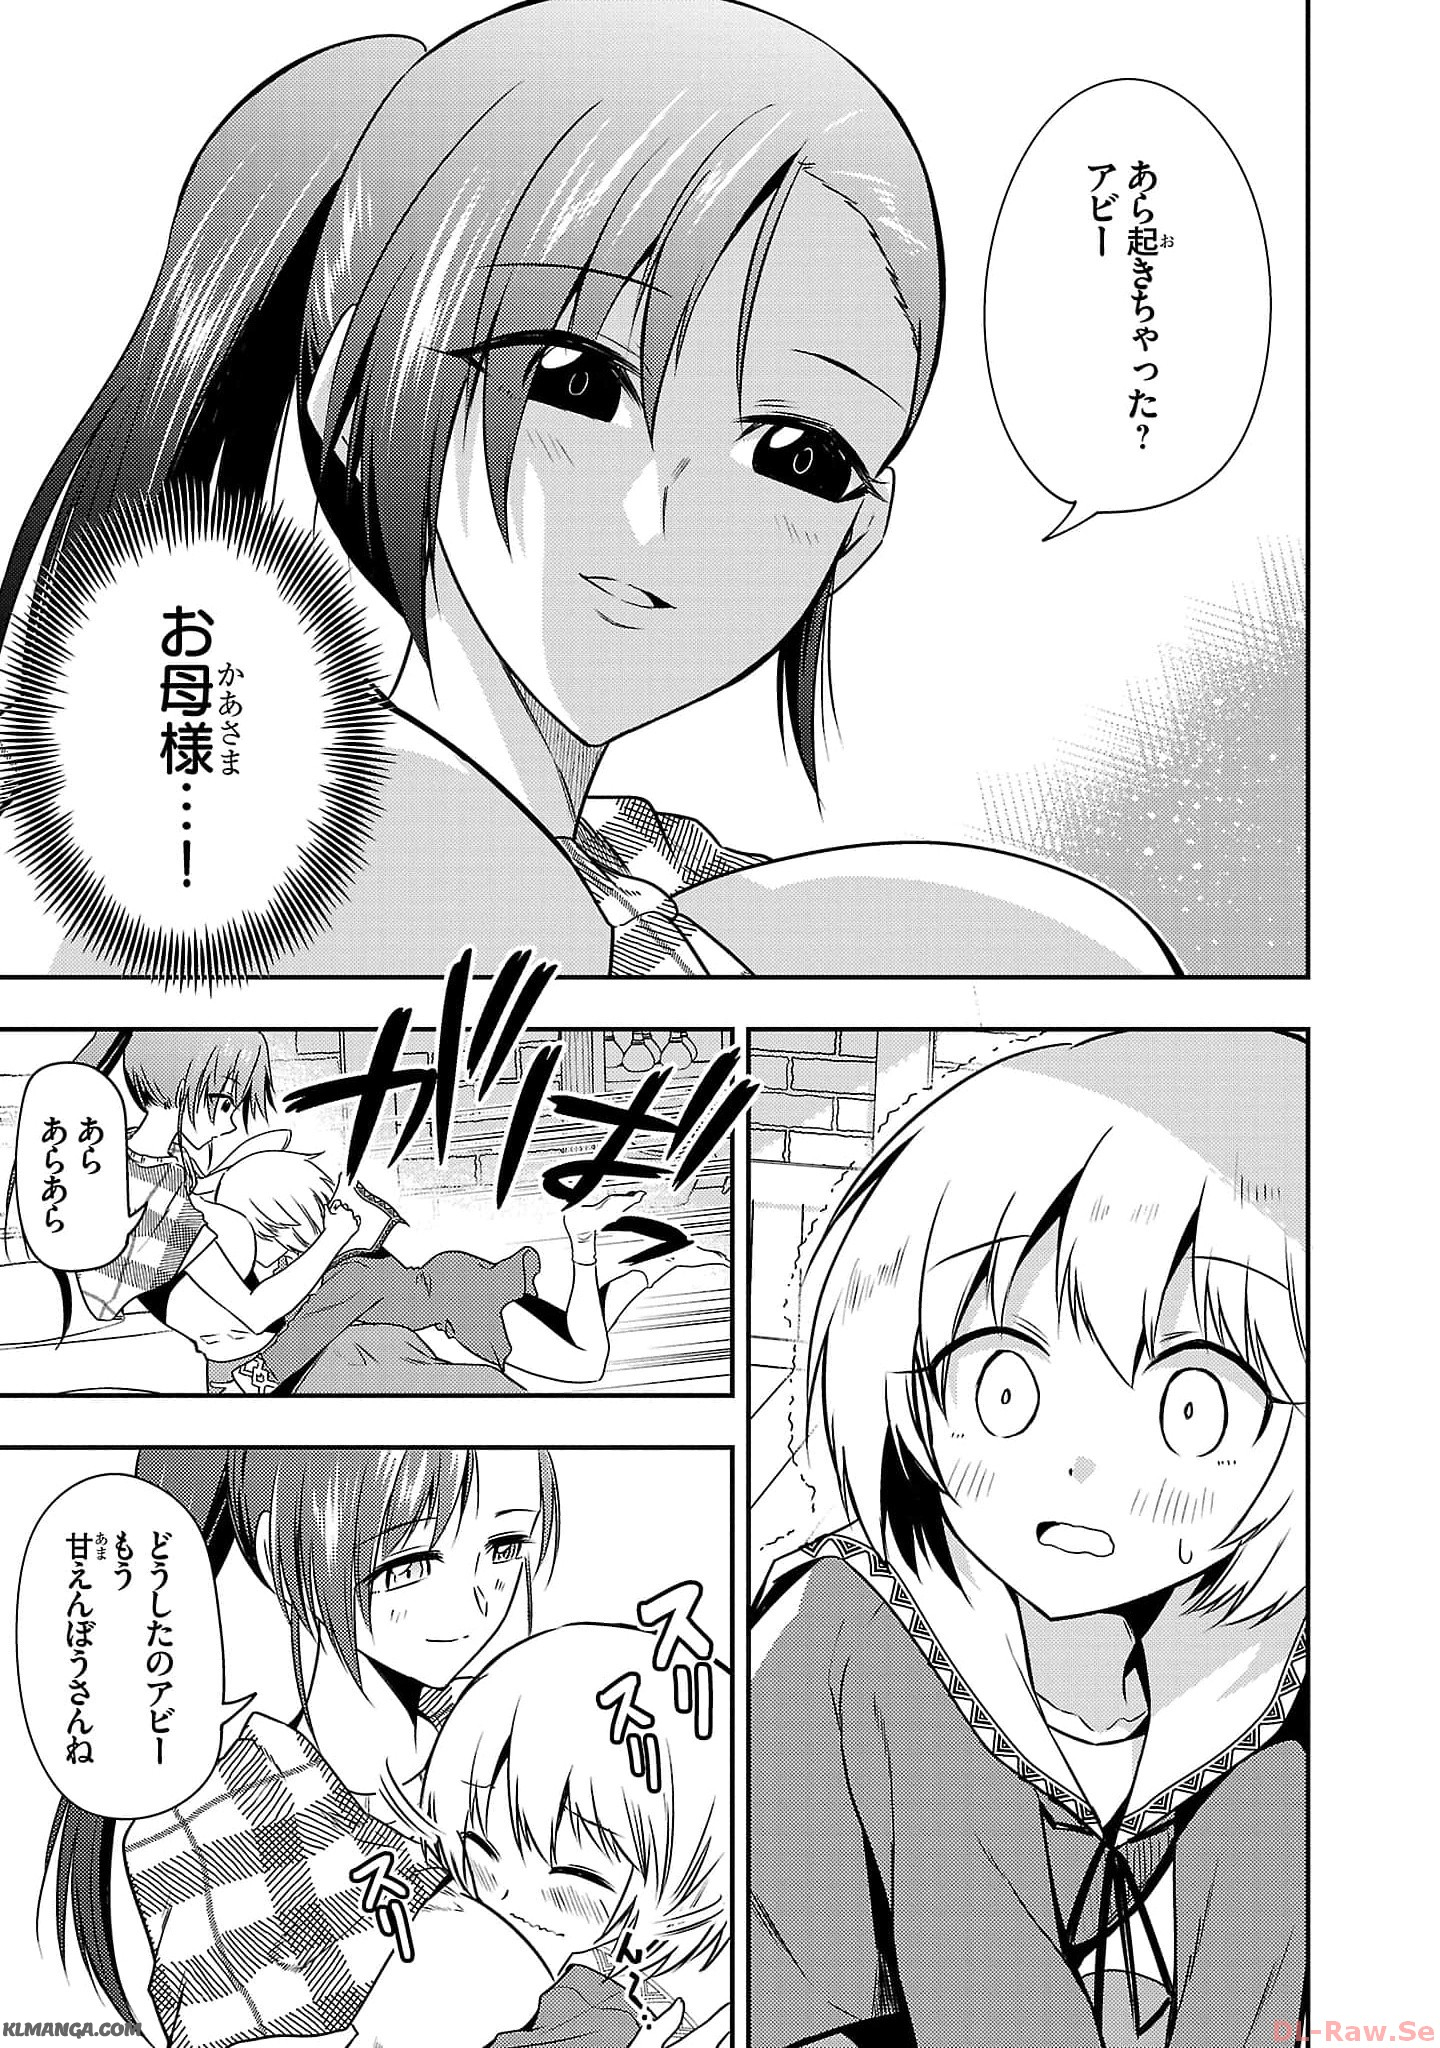 Hungry Saint and Full-Stomach Witch’s Slow Life in Another World! 腹ペコ聖女とまんぷく魔女の異世界スローライフ! 第19話 - Page 13